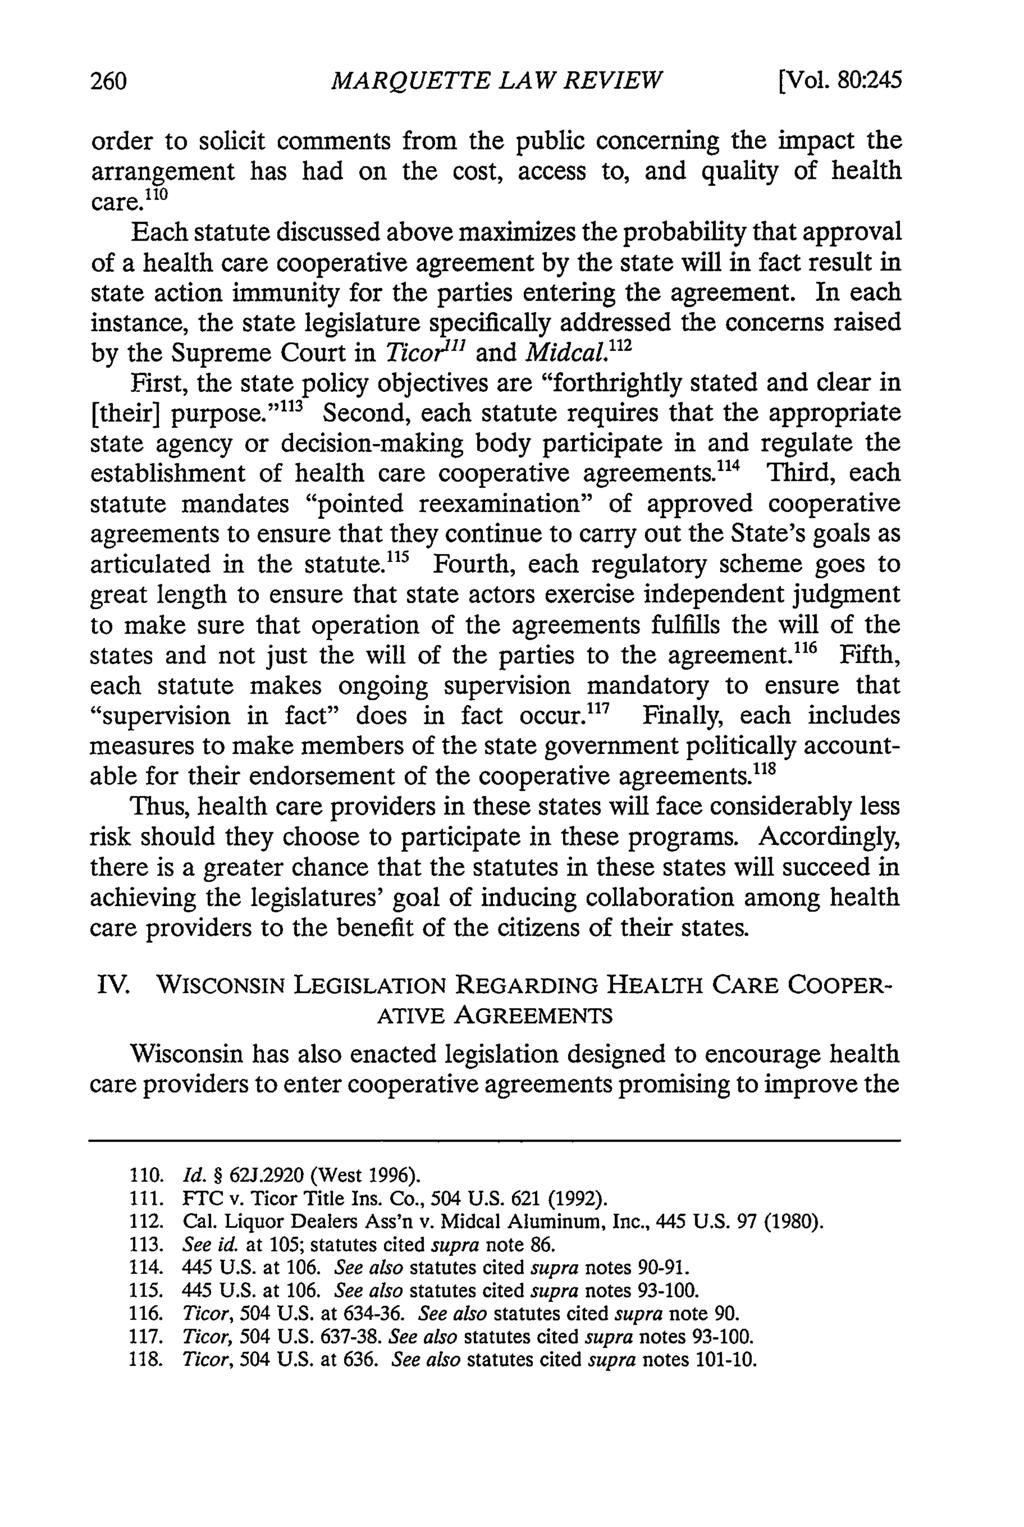 MARQUETTE LAW REVIEW [Vol. 80:245 order to solicit comments from the public concerning the impact the arrangement has had on the cost, access to, and quality of health care.